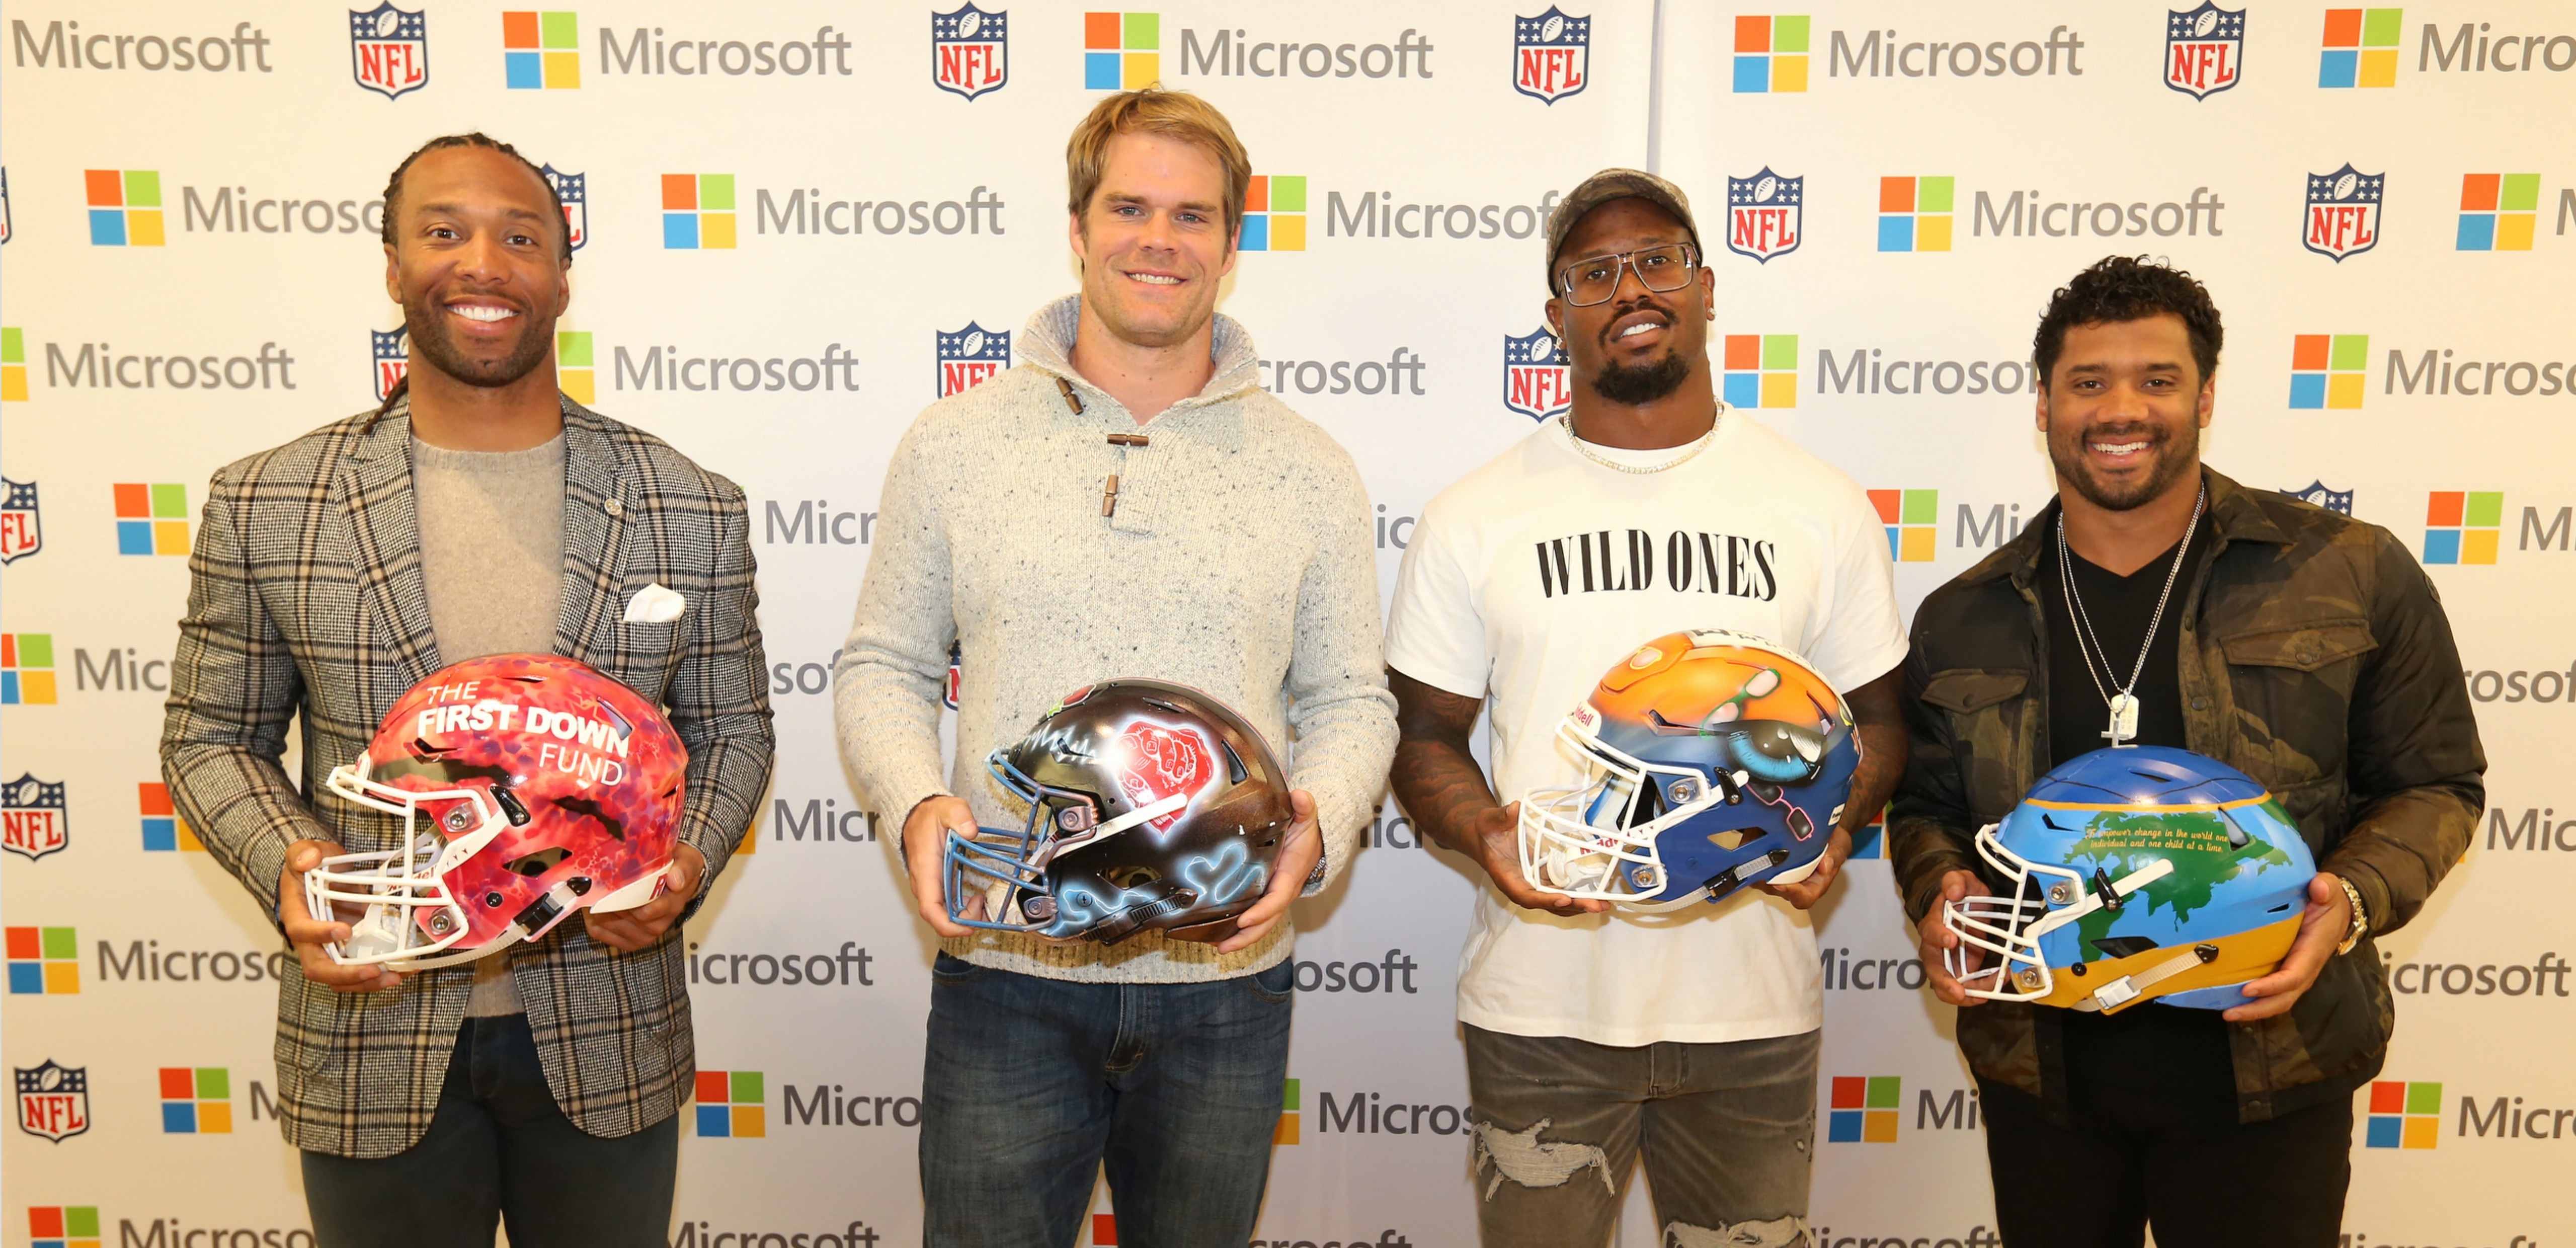 NFL players Larry Fitzgerald, Greg Olsen, Von Miller, and Russell Wilson pose with their custom designed helmets